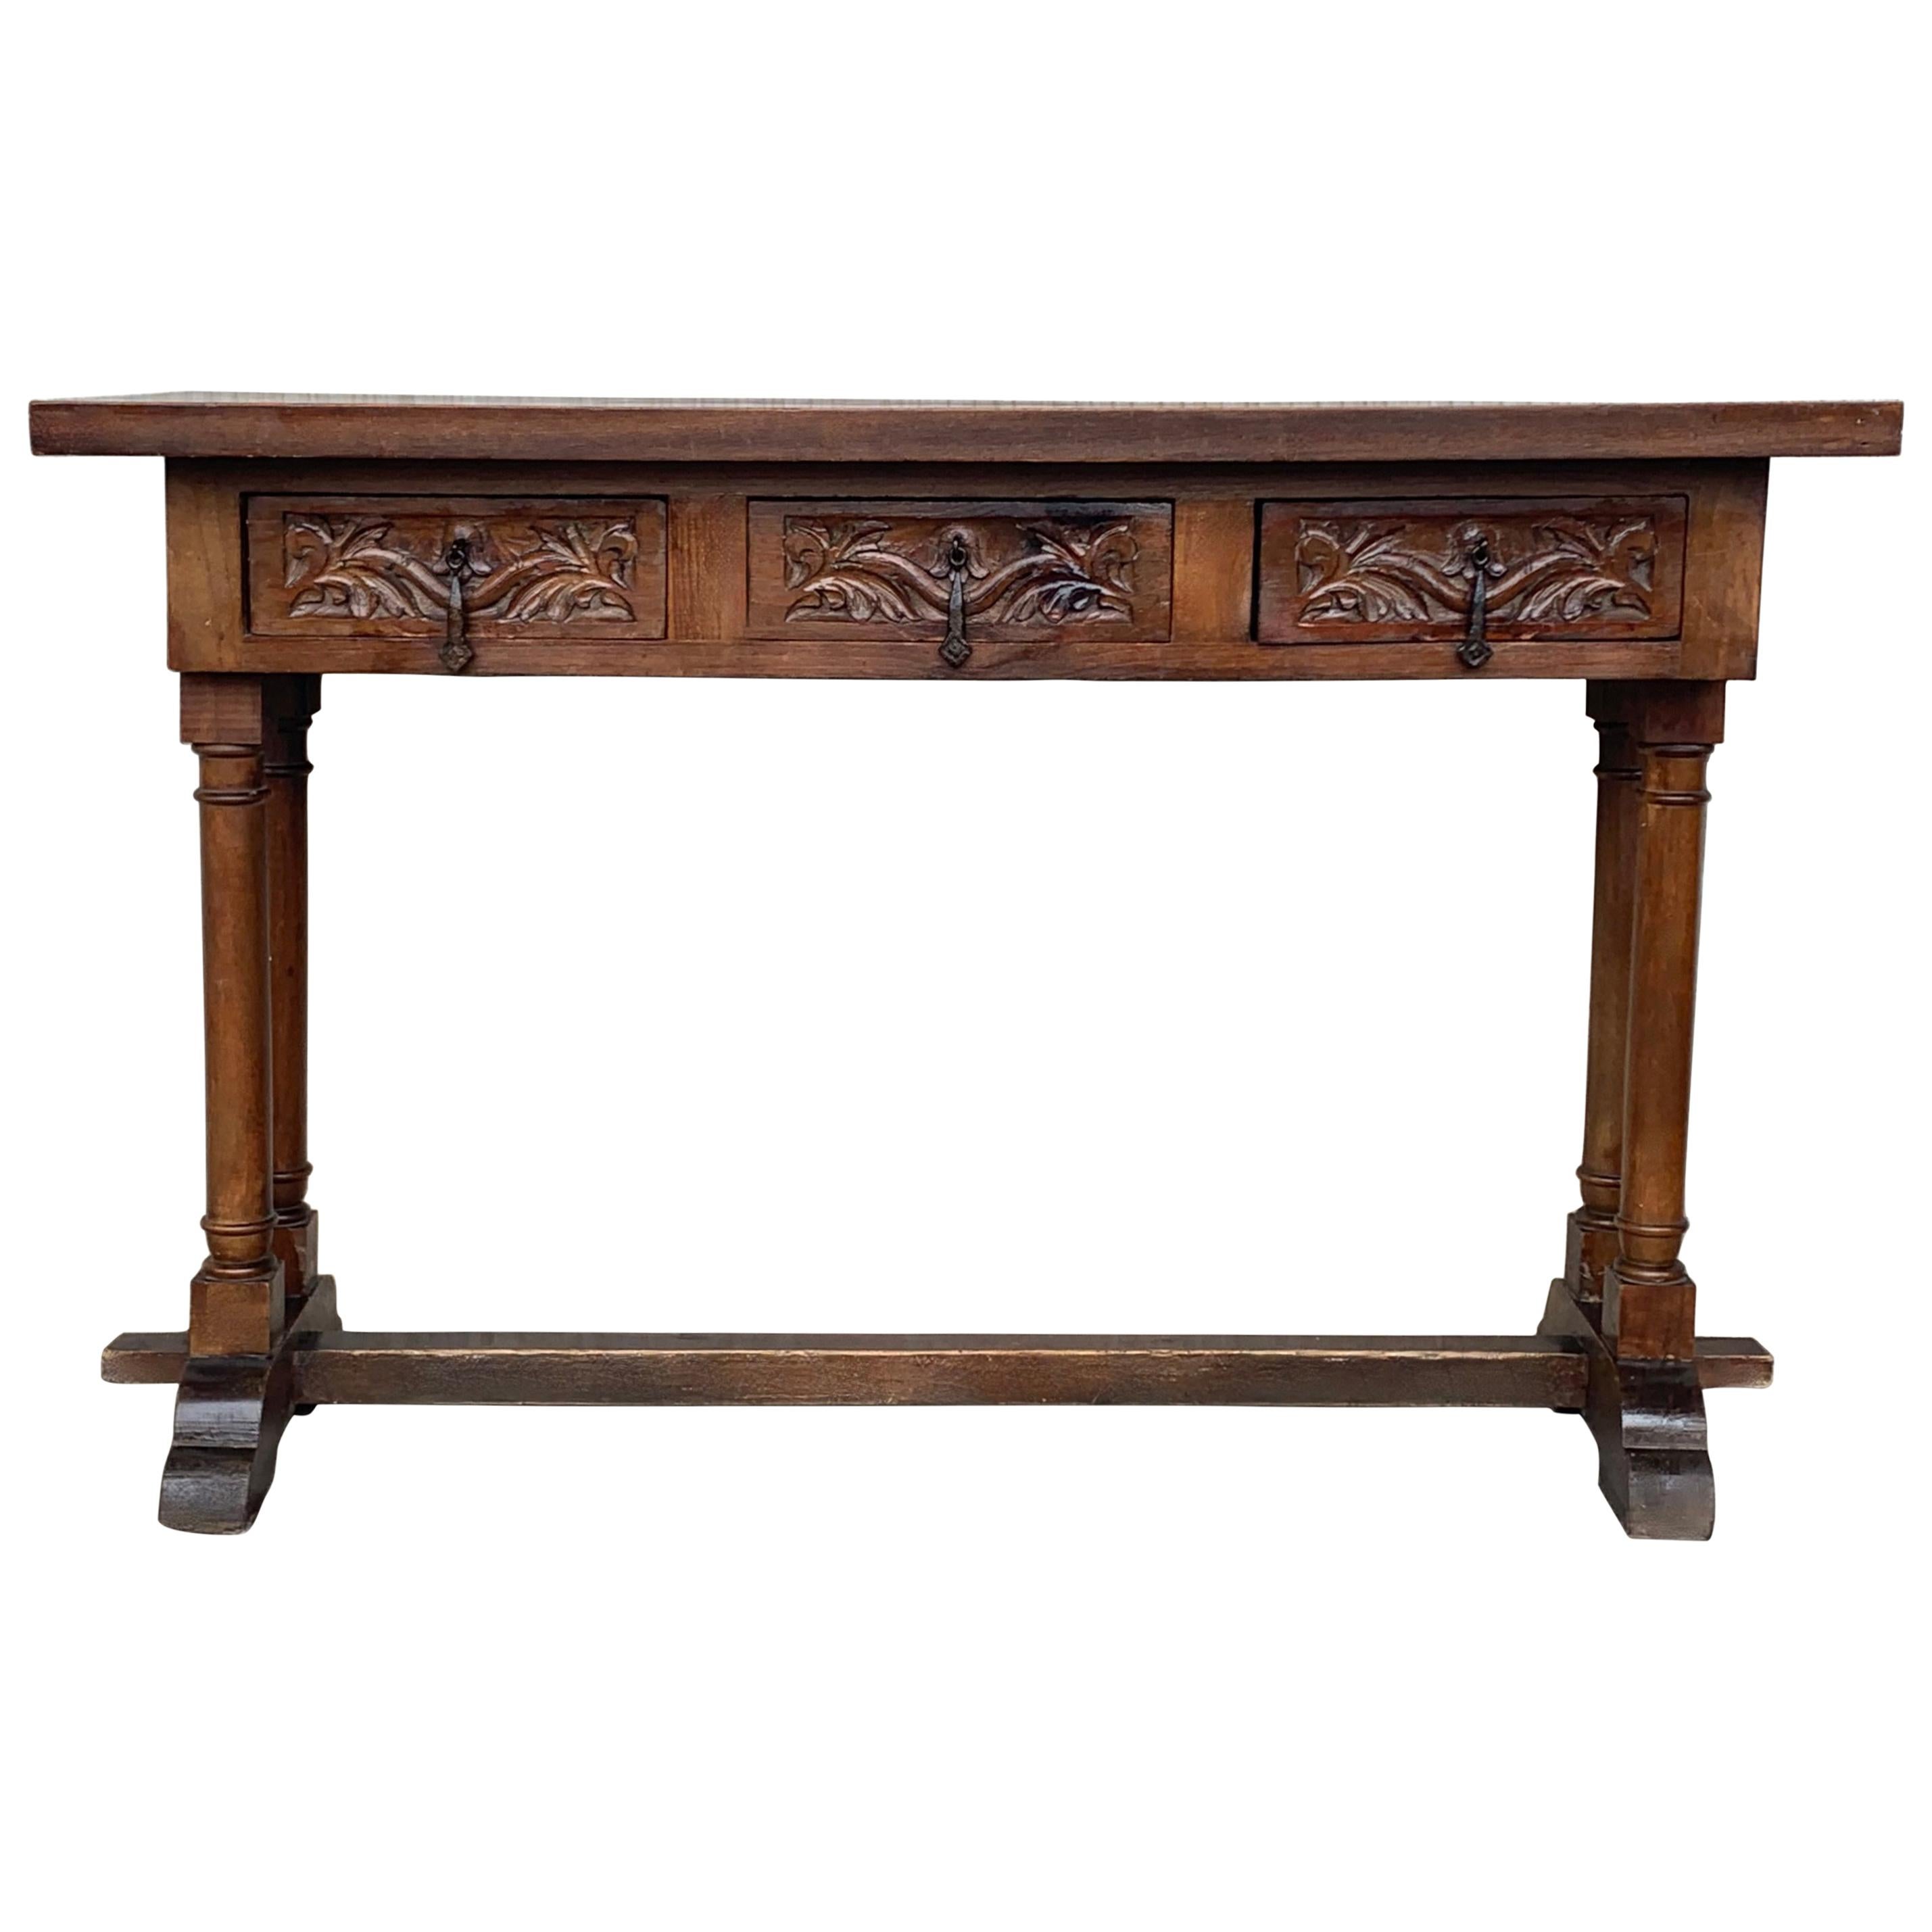 20th Century Carved Three-Drawer Spanish Walnut Console Table with Iron Hardware